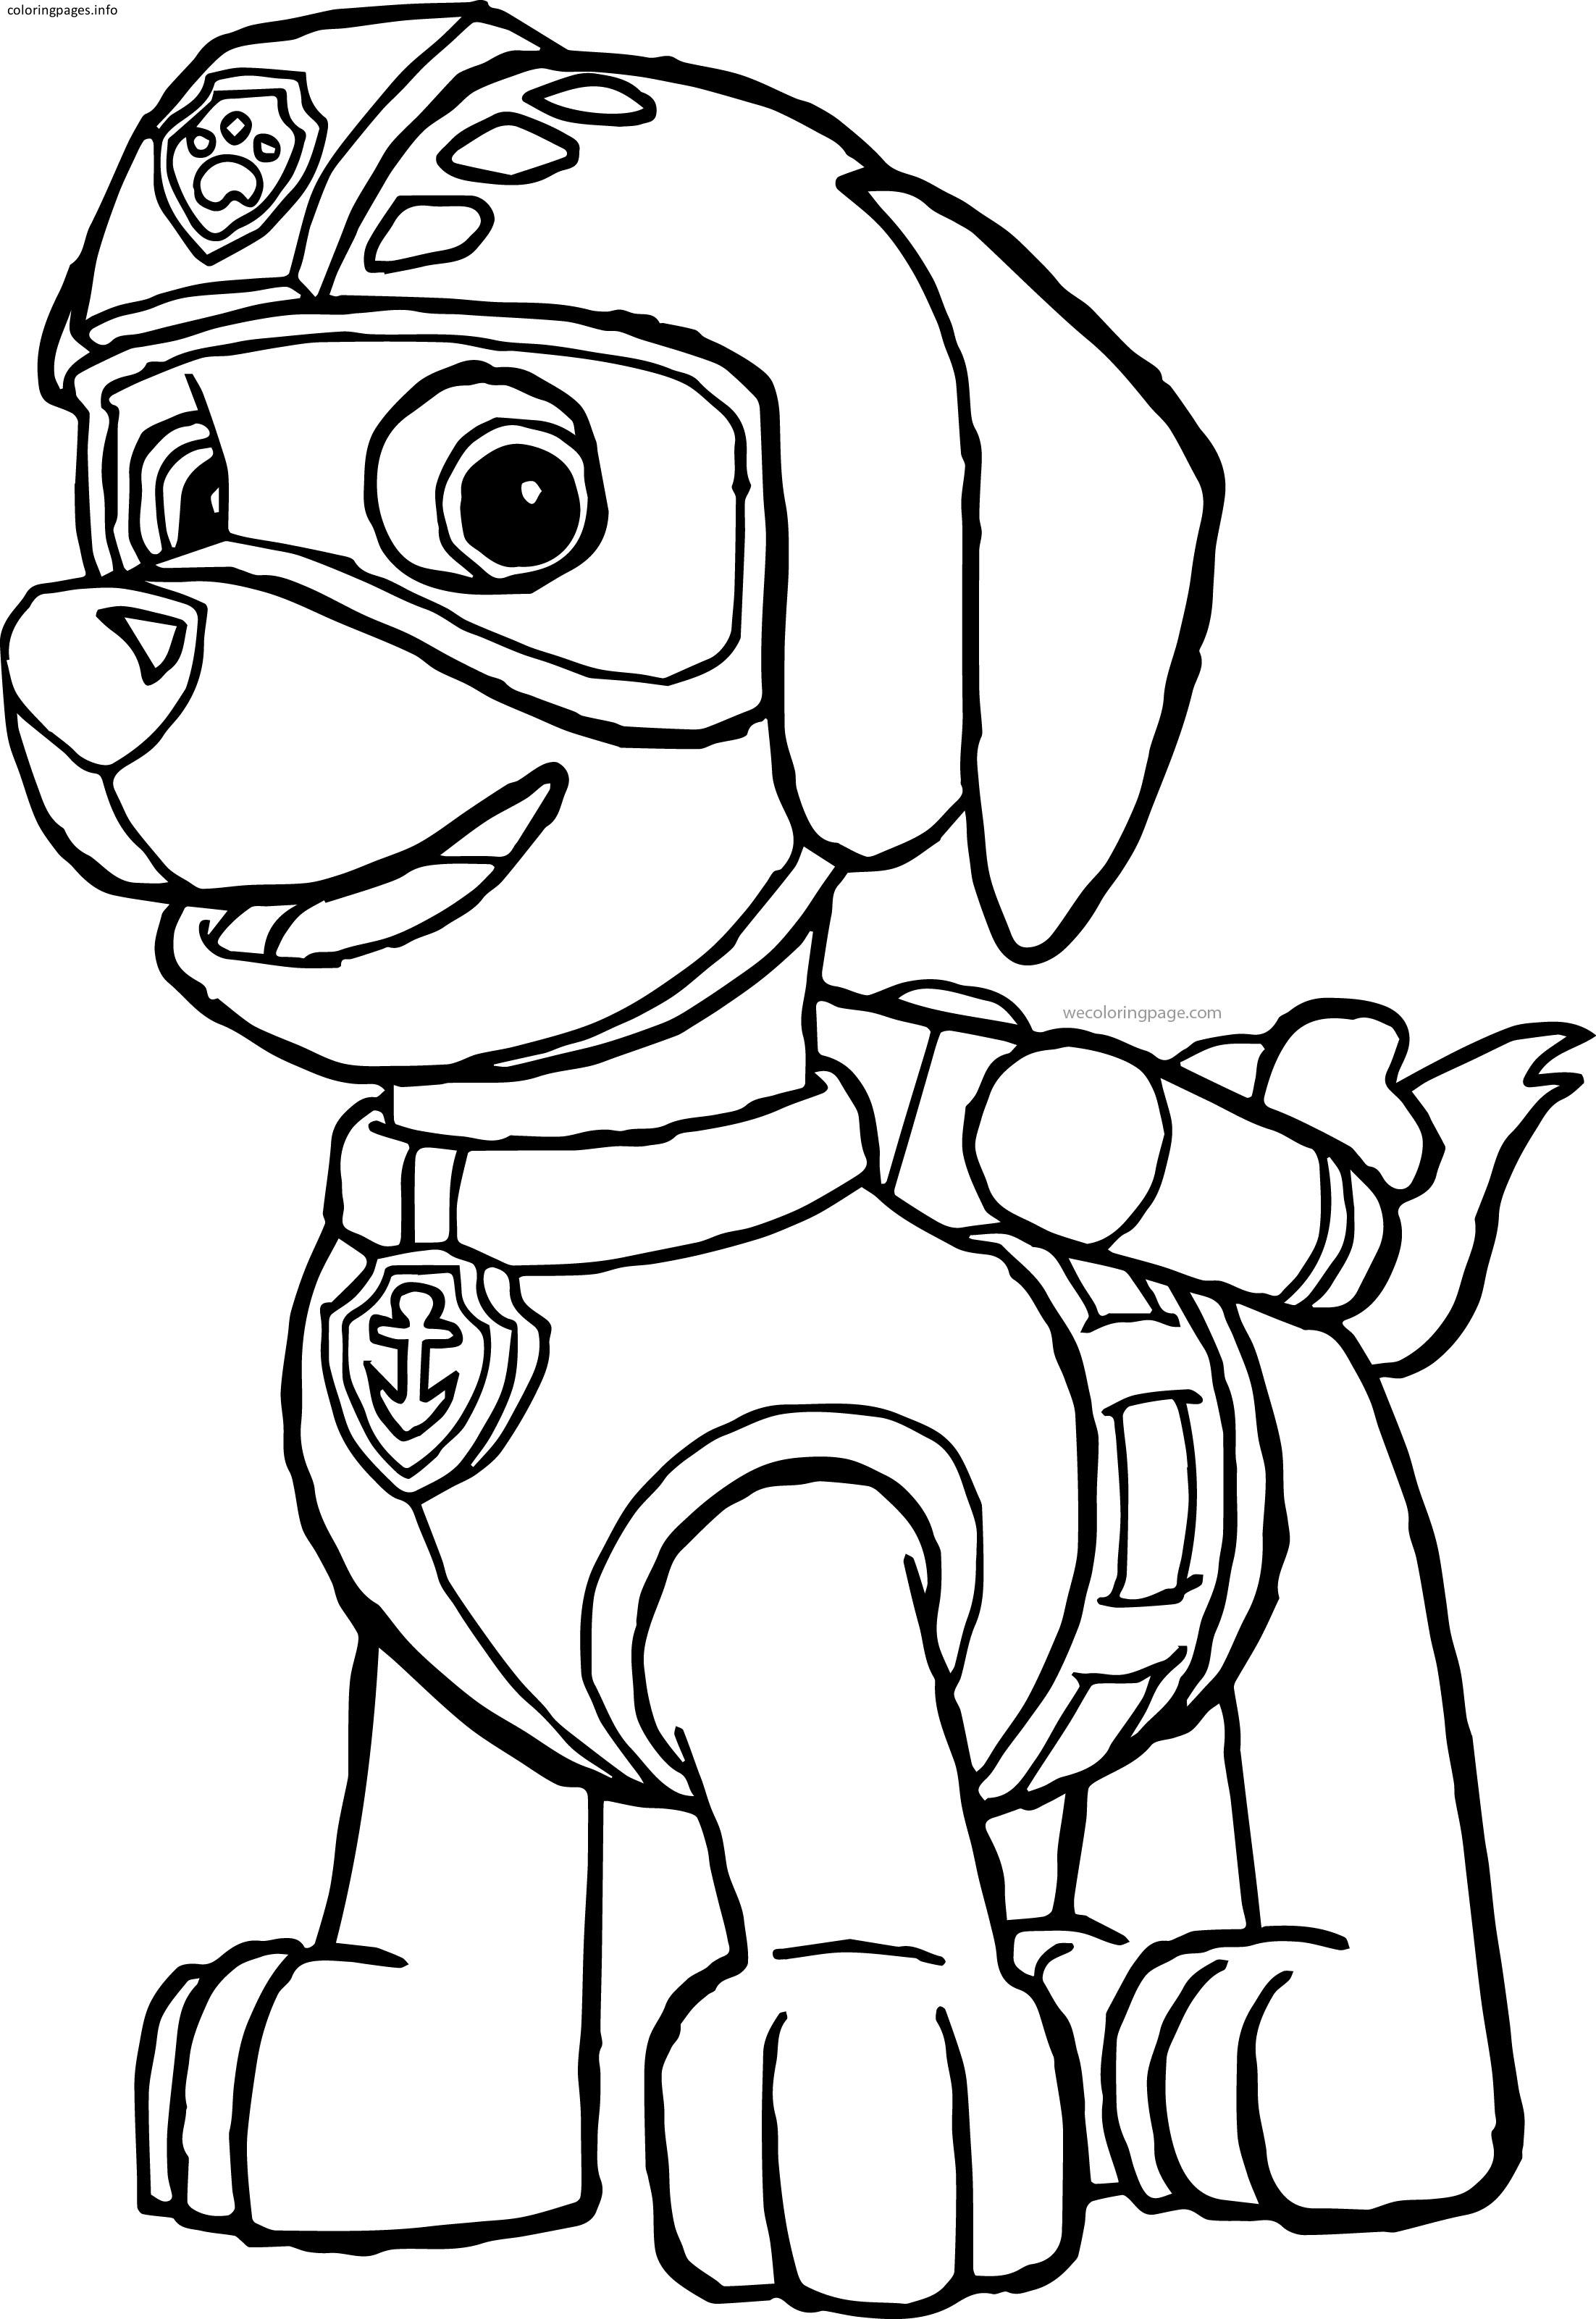 Paw Patrol Coloring Pages FREE Printable 129